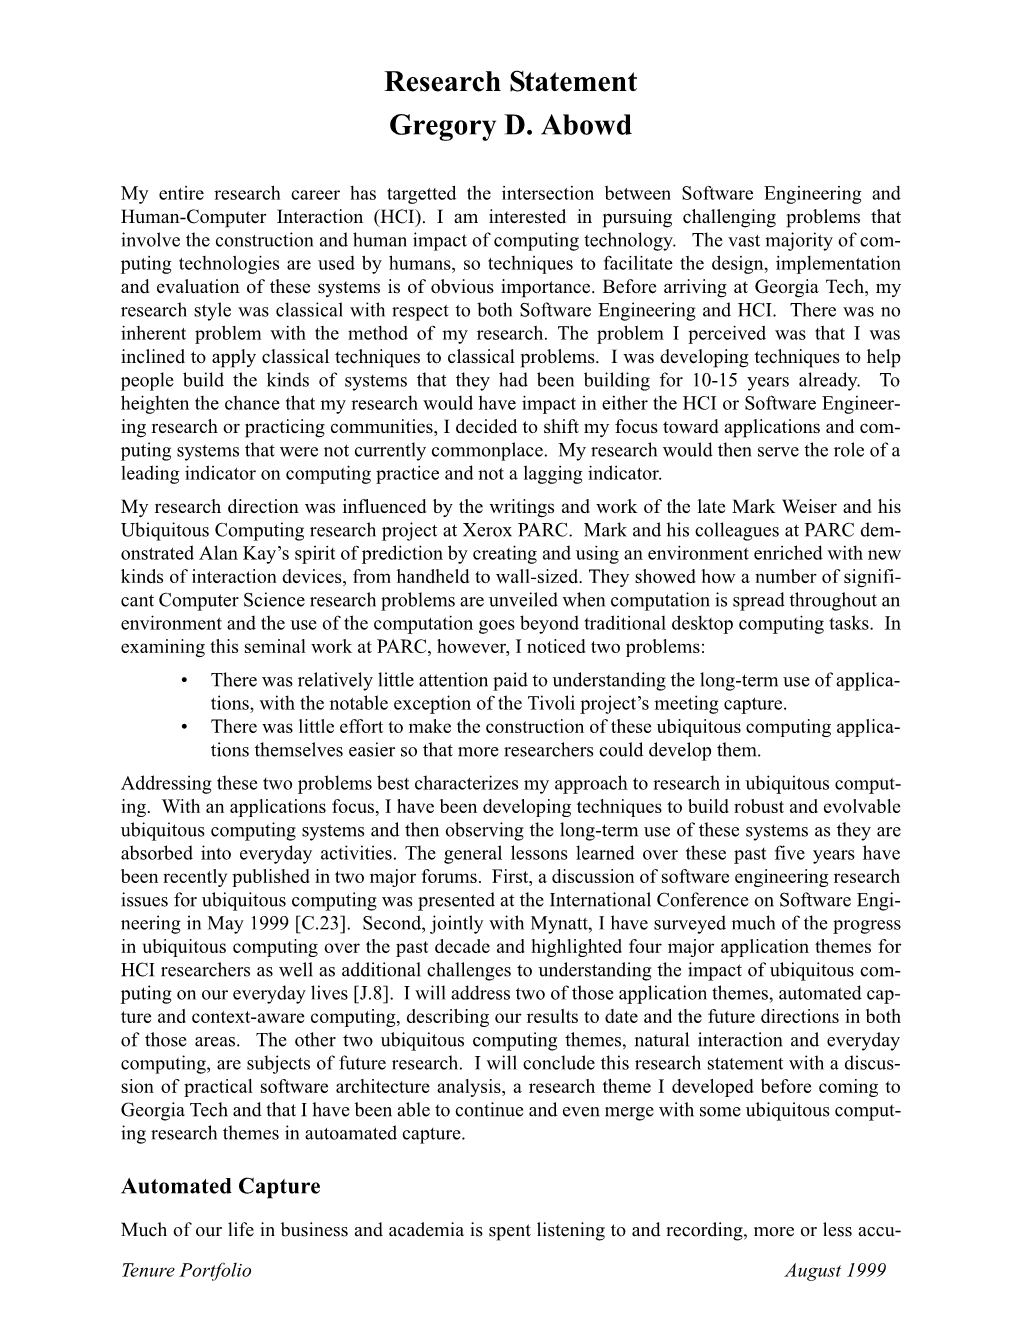 Research Statement Gregory D. Abowd